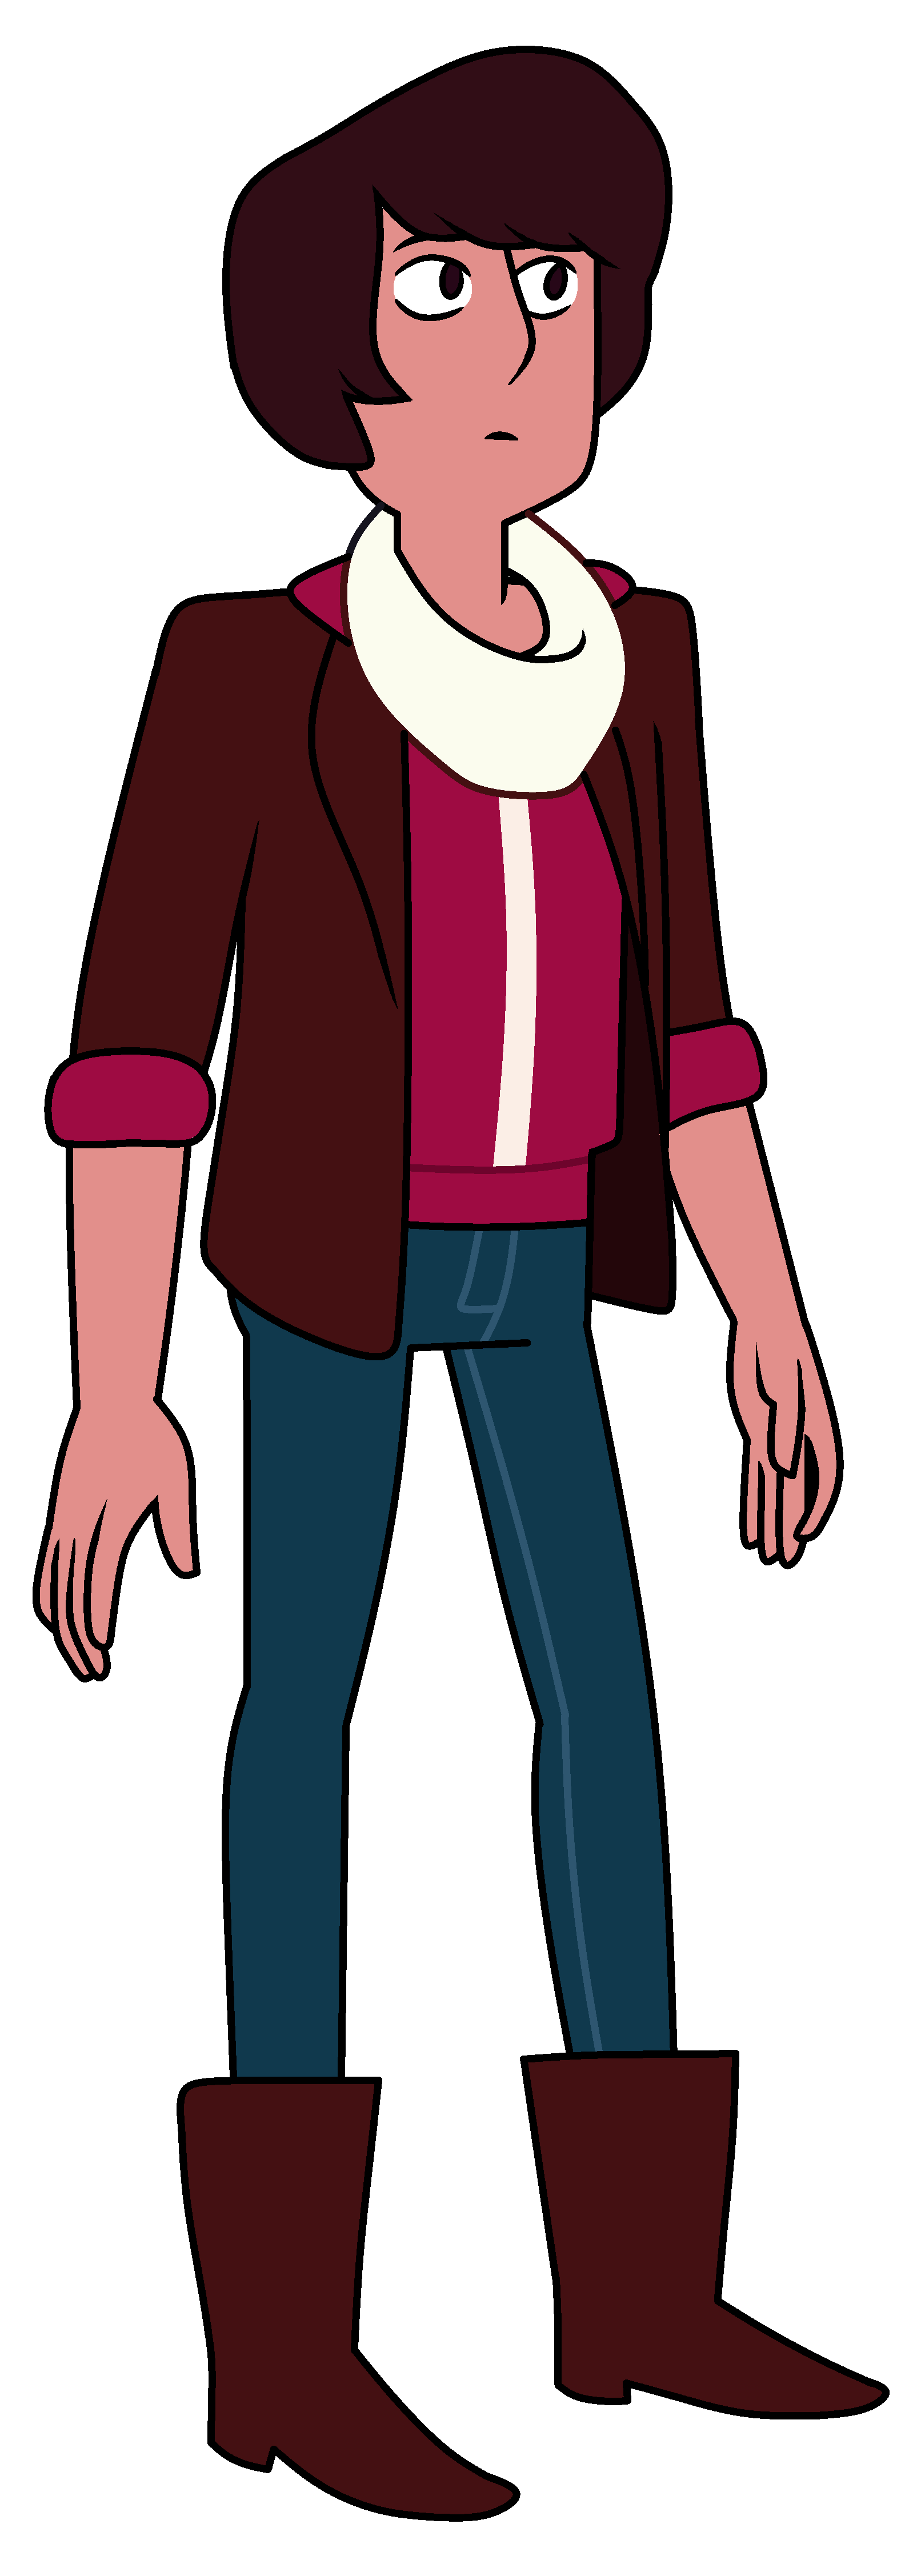 Dad clipart standing alone. Kevin steven universe wiki